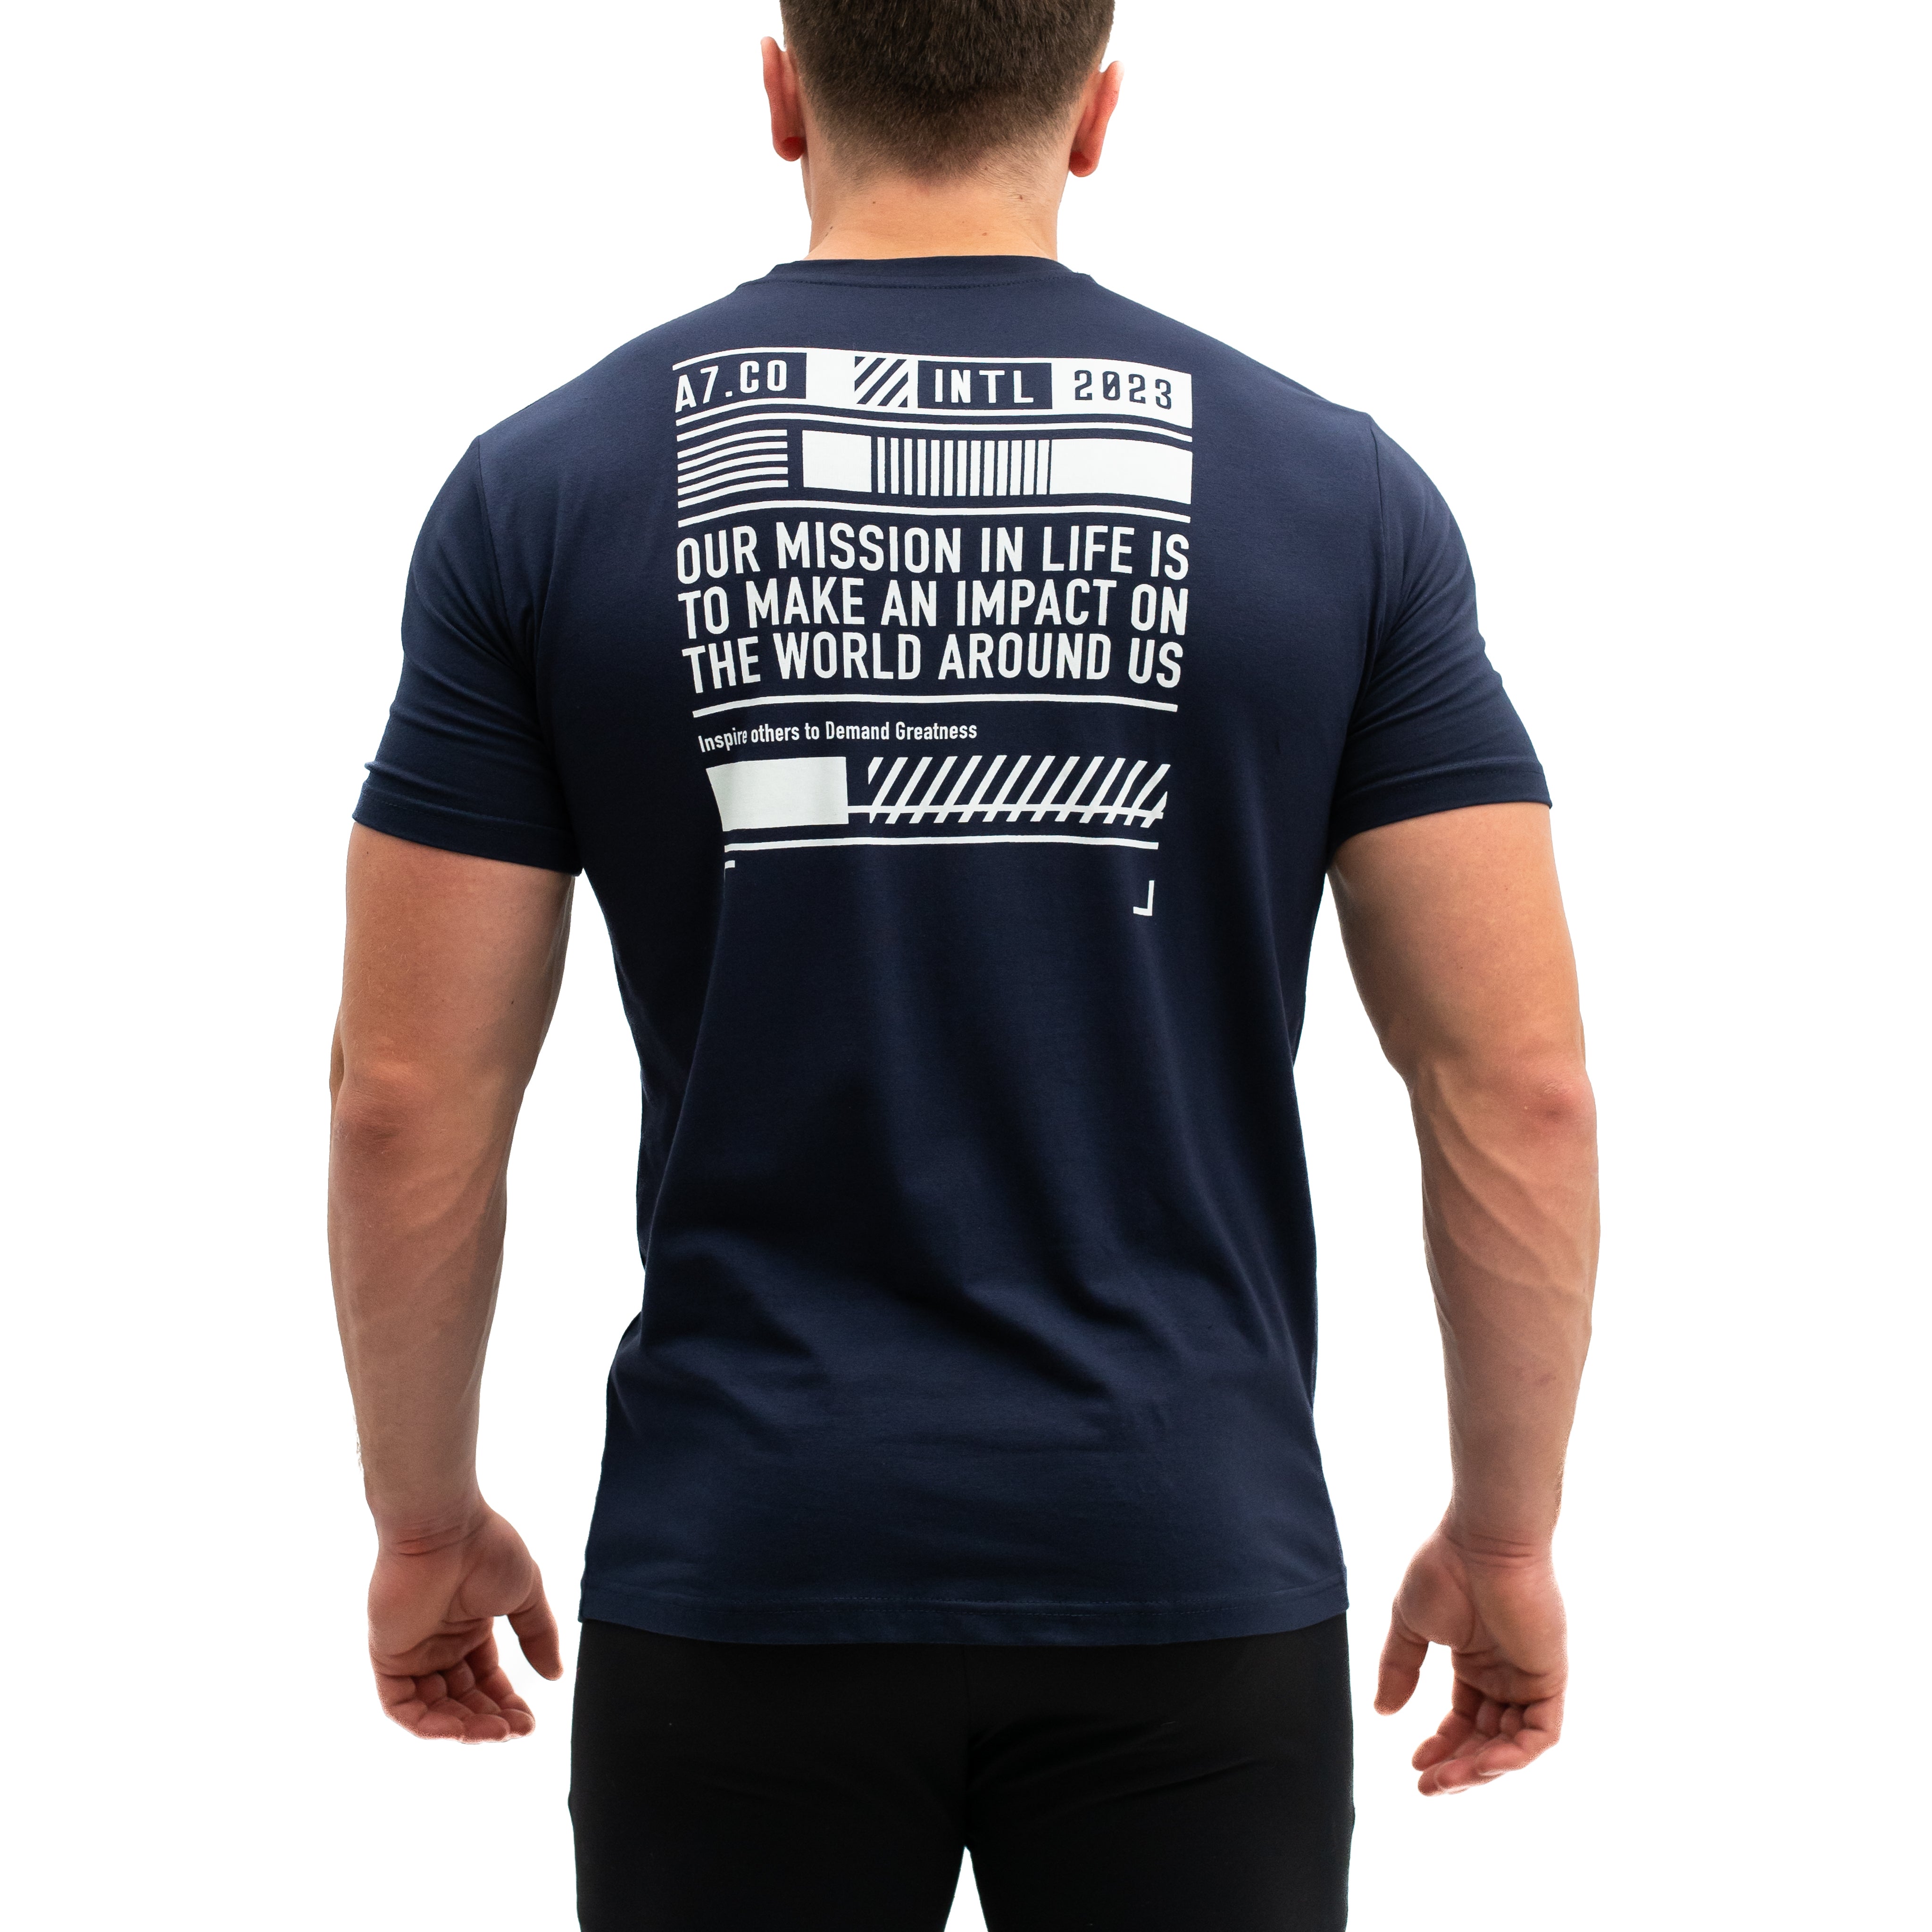 The Impact Shirt reminds us we can conquer challenges and make an impact. The future is only the continuation of our progress. Purchase Impact Shirt from A7 UK and A7 Europe. A7UK has the best Powerlifting apparel for all workouts. Available in UK and Europe including France, Italy, Germany, the Netherlands, Sweden and Poland.